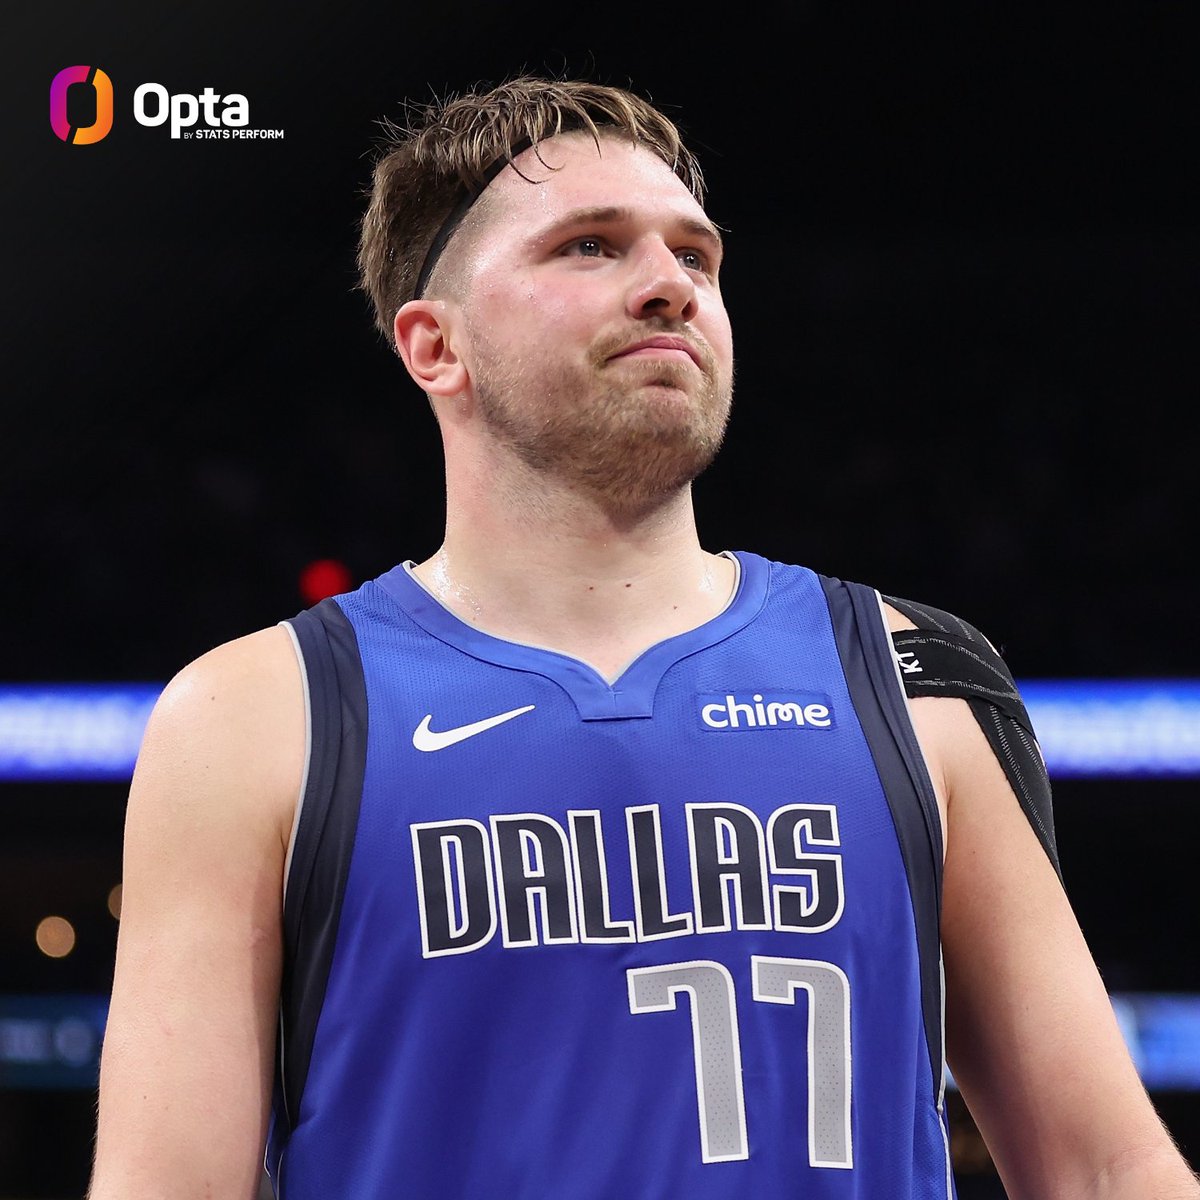 50+ points 15+ assists 8+ threes made 3+ blocks & 3+ steals 60/50/100 shooting splits (FG/3P/FT) 12+ FT without a miss That's what the @dallasmavs' Luka Dončić did this Christmas. No one else in NBA history has accomplished all 6 of those single-game feats over an entire season.